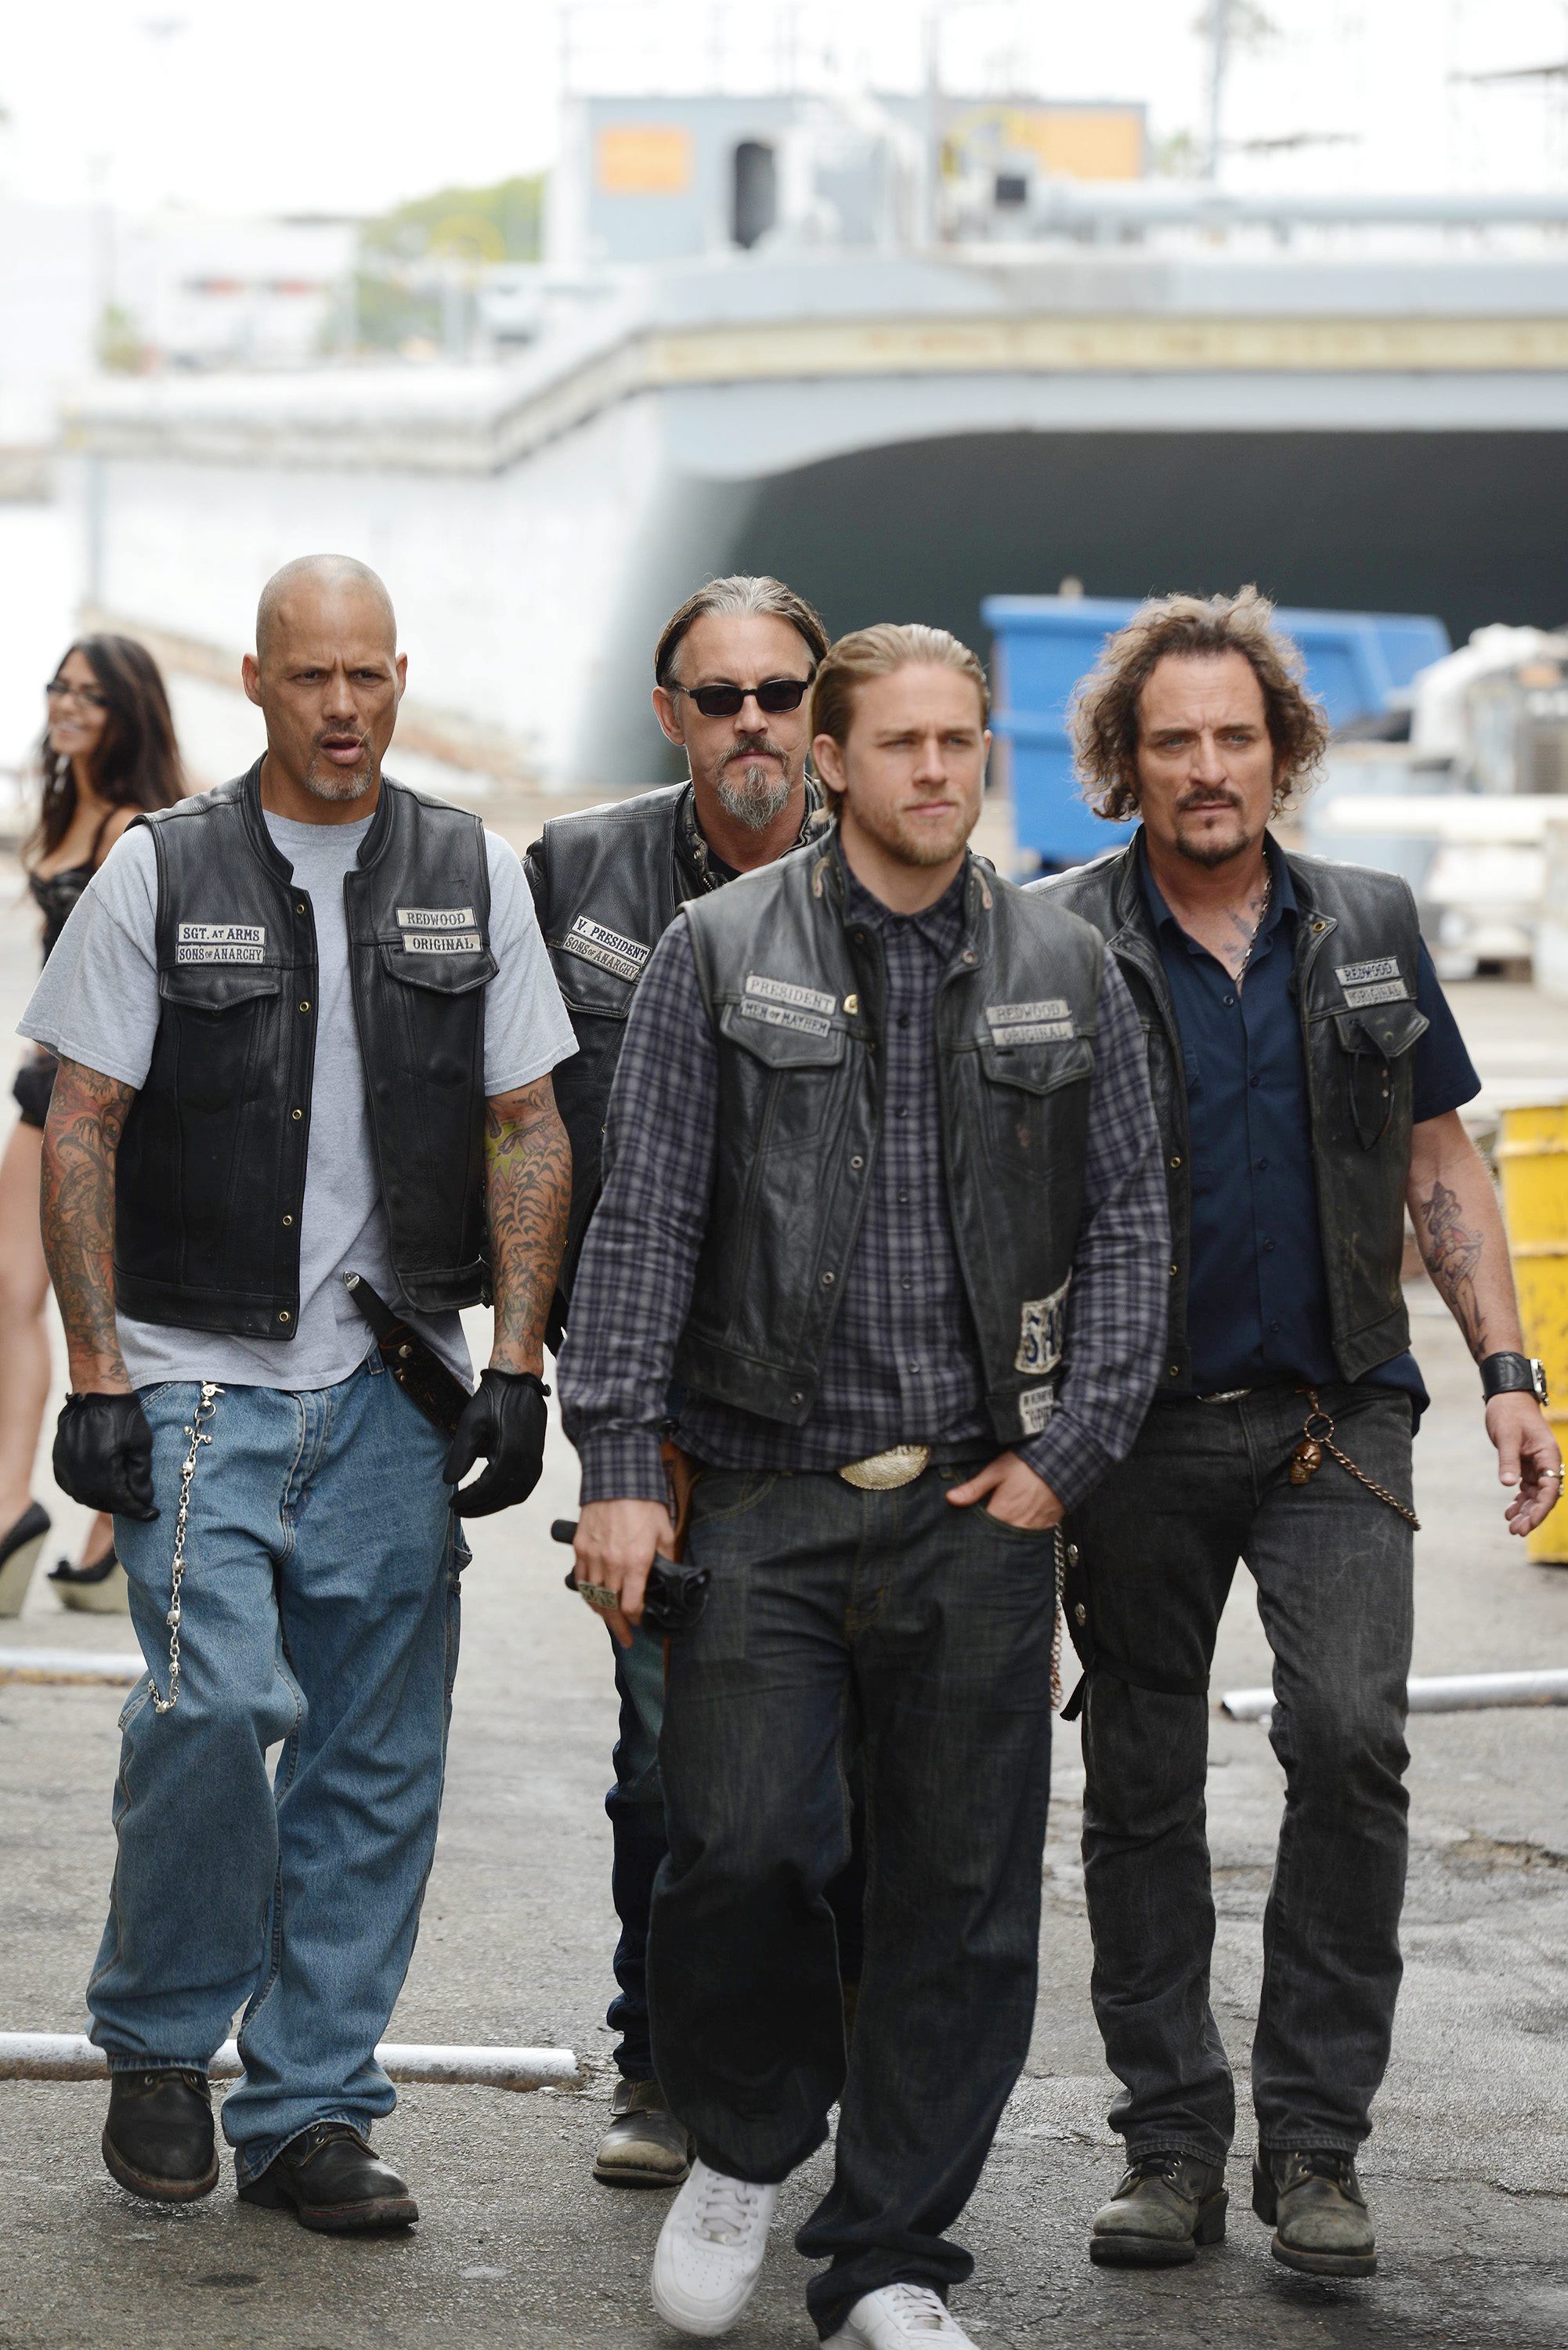 Sons Of Anarchy Behind The Scenes Secrets Page 5 of 10 Fame10